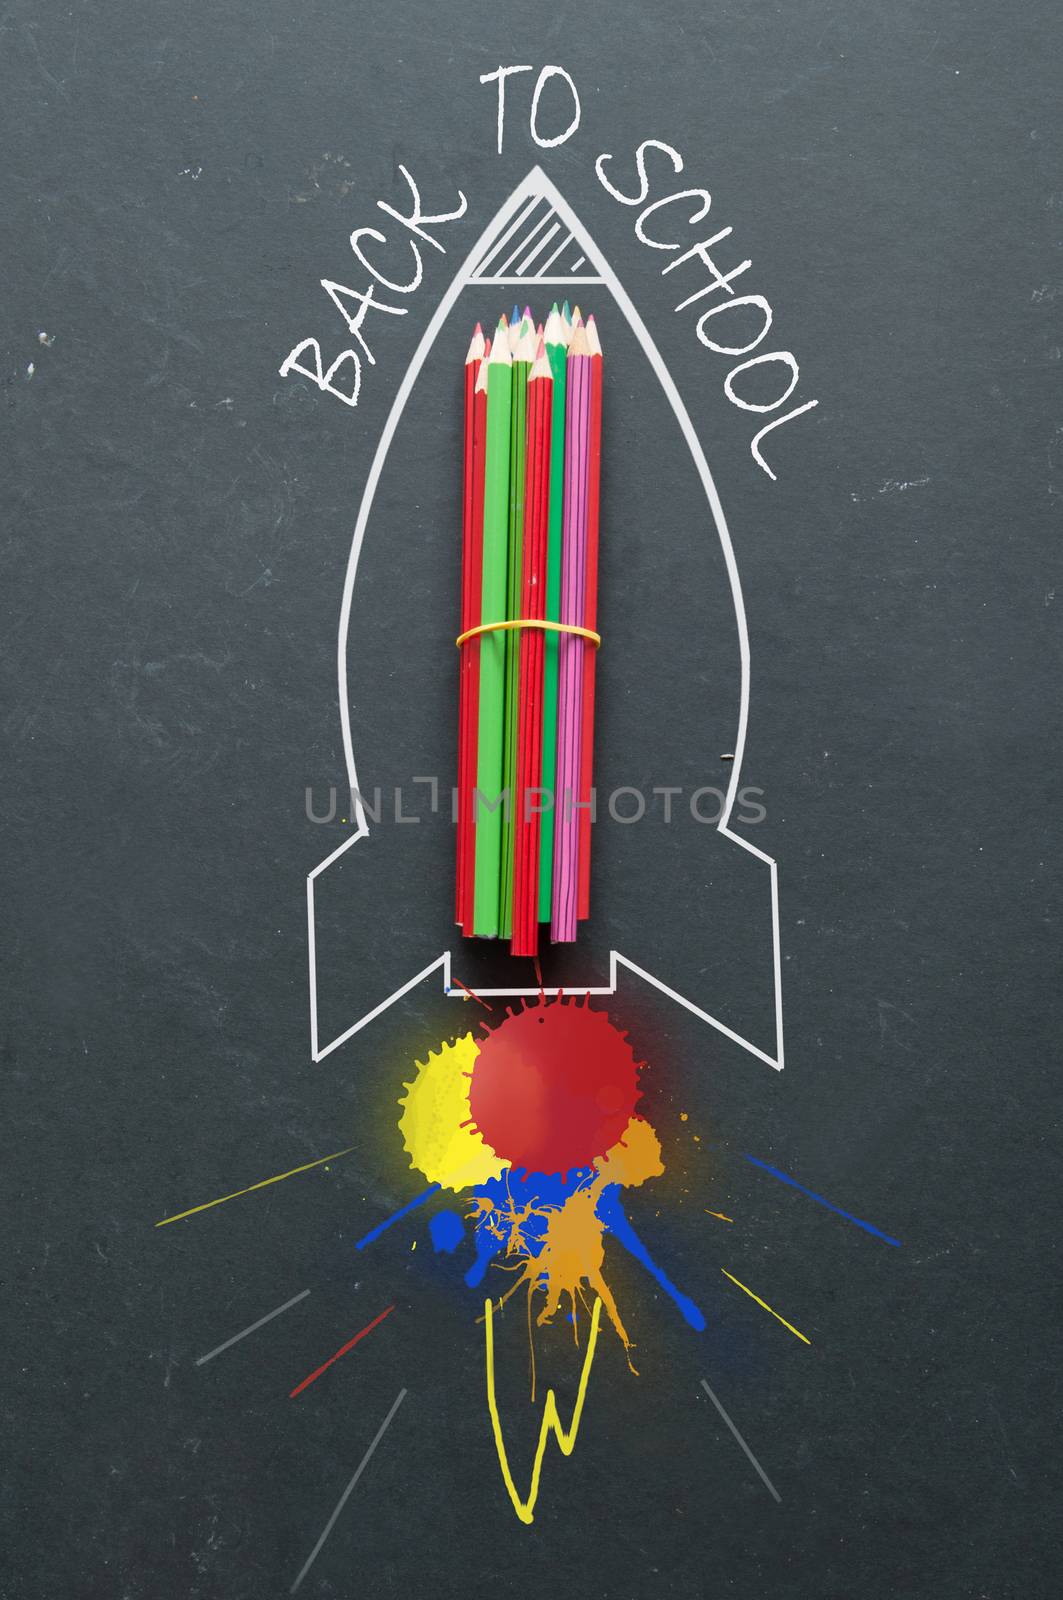 Rocket launch sketch with colourful pencils and paint burst 